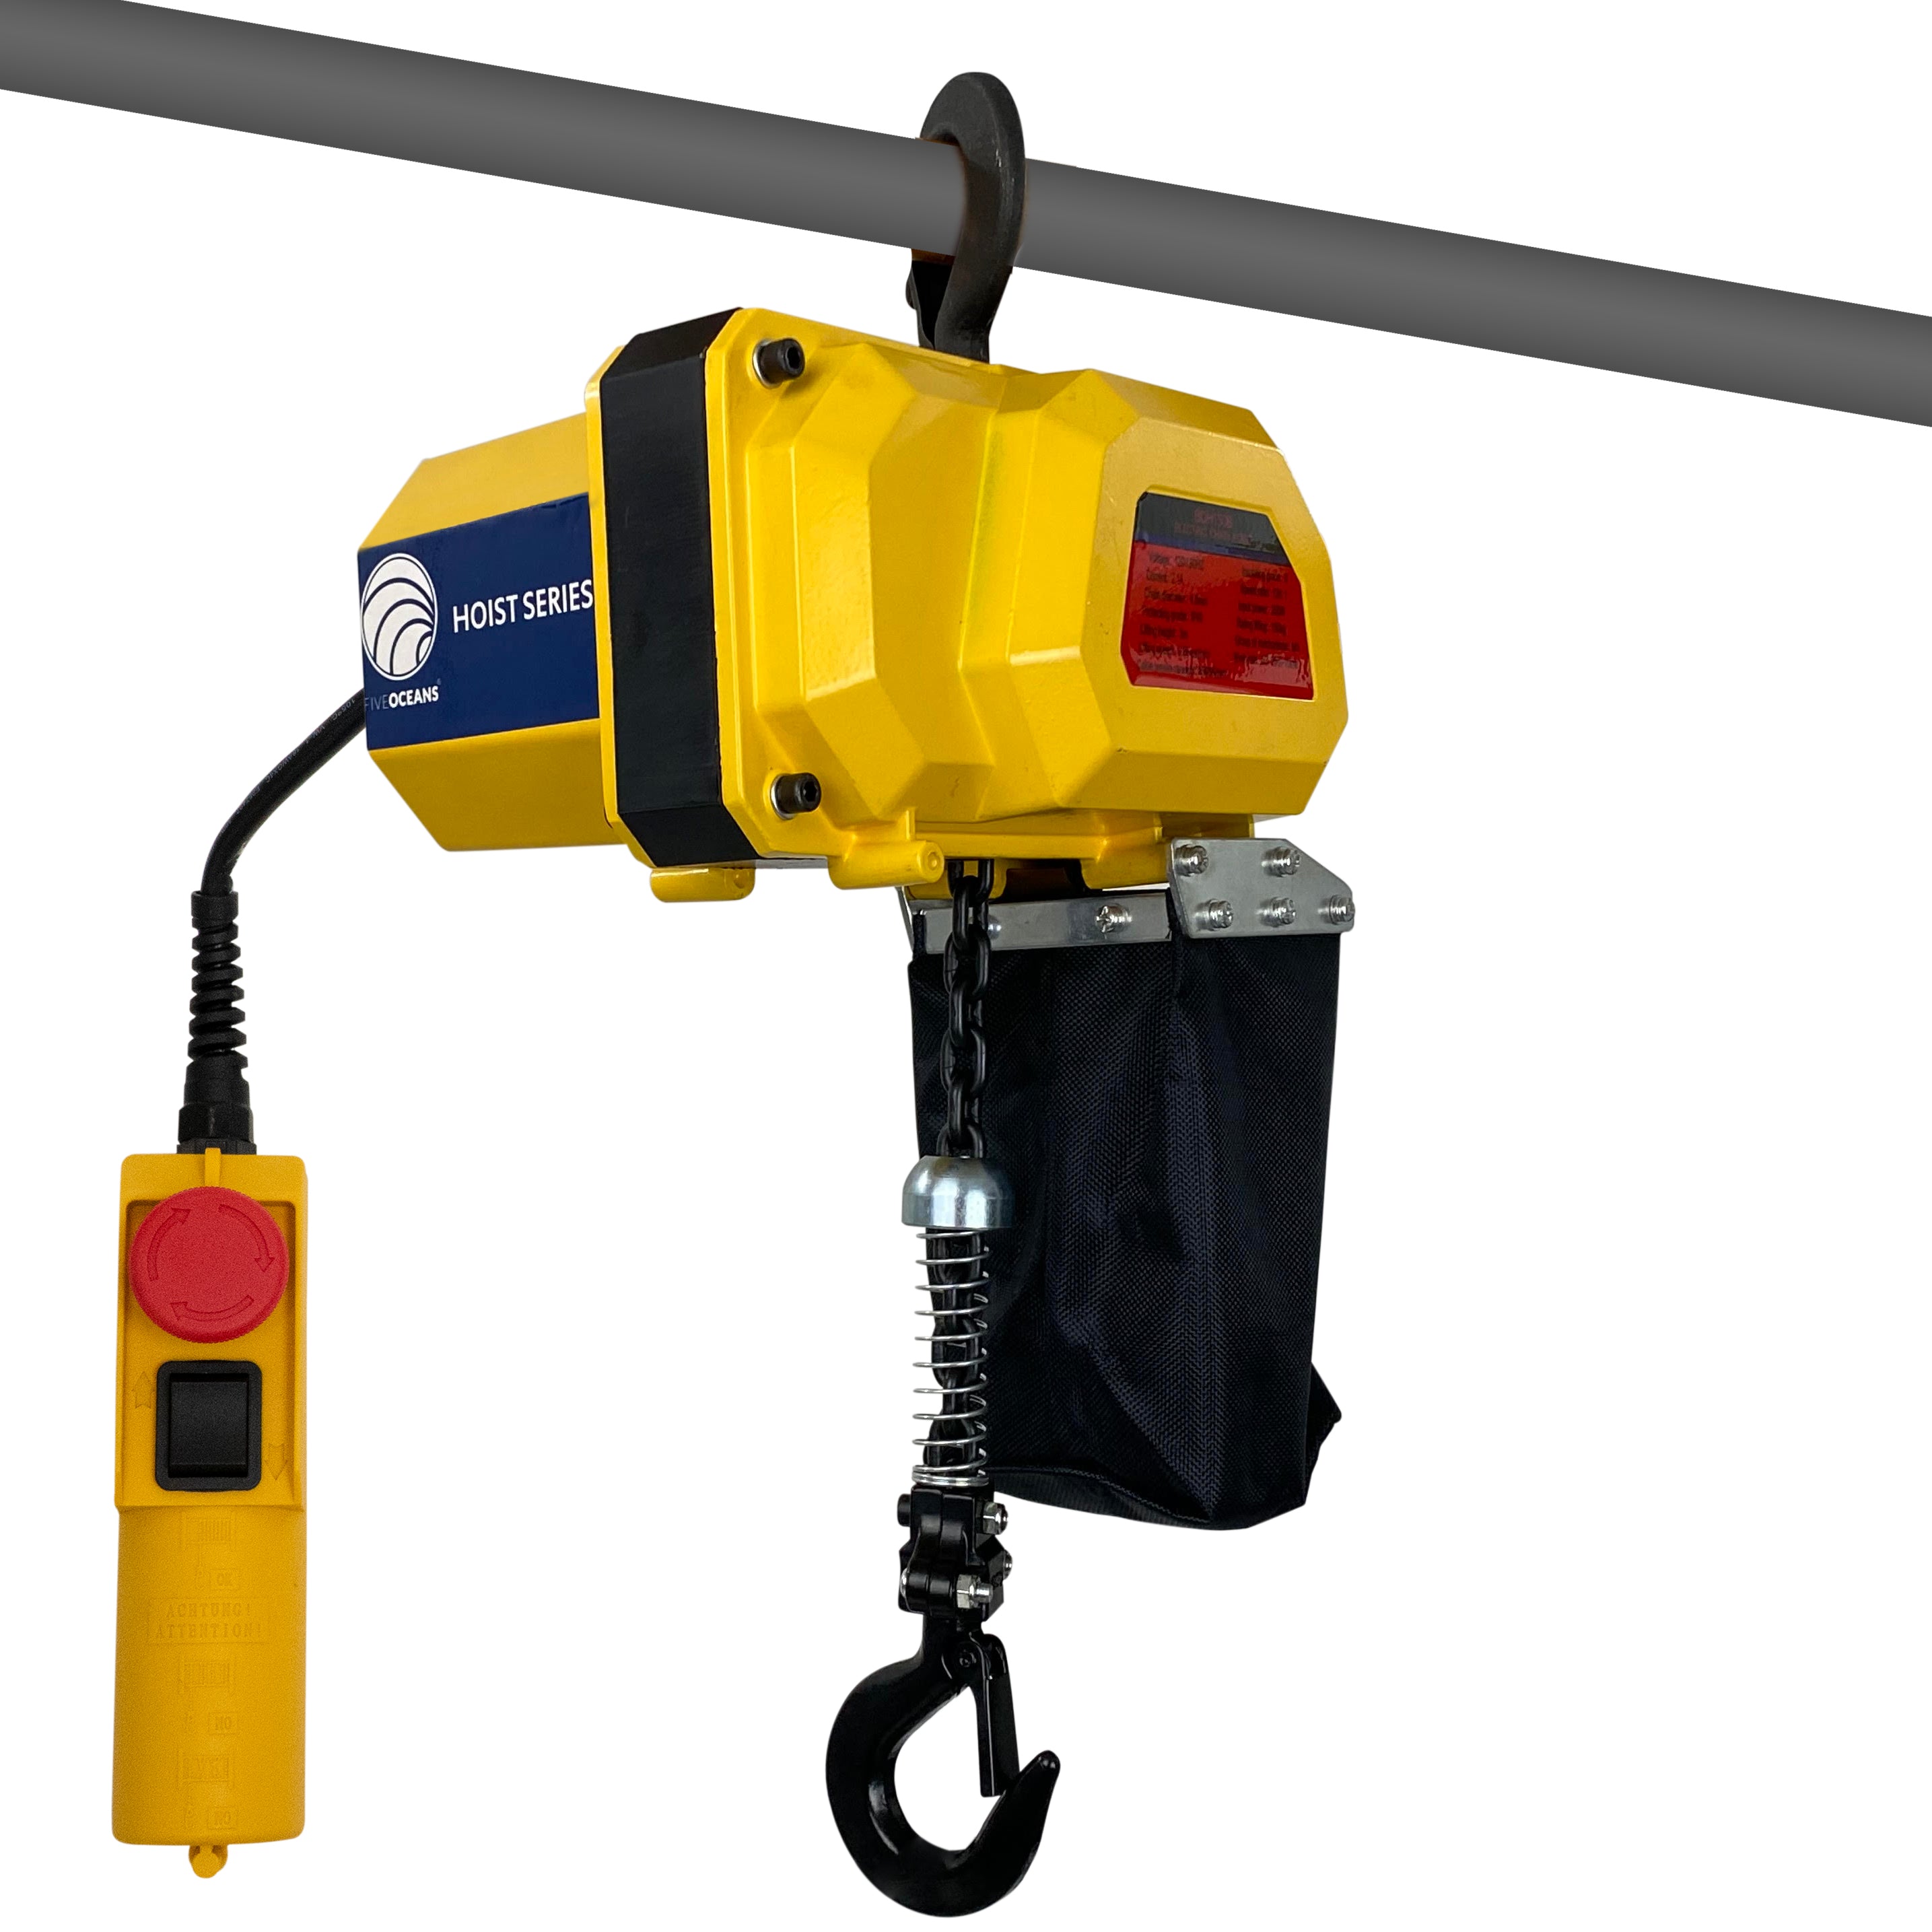 Electric Chain Hoist 330LBS / 150KG, 6 FT Remote Control, 120 V / 60 HZ - FO4437